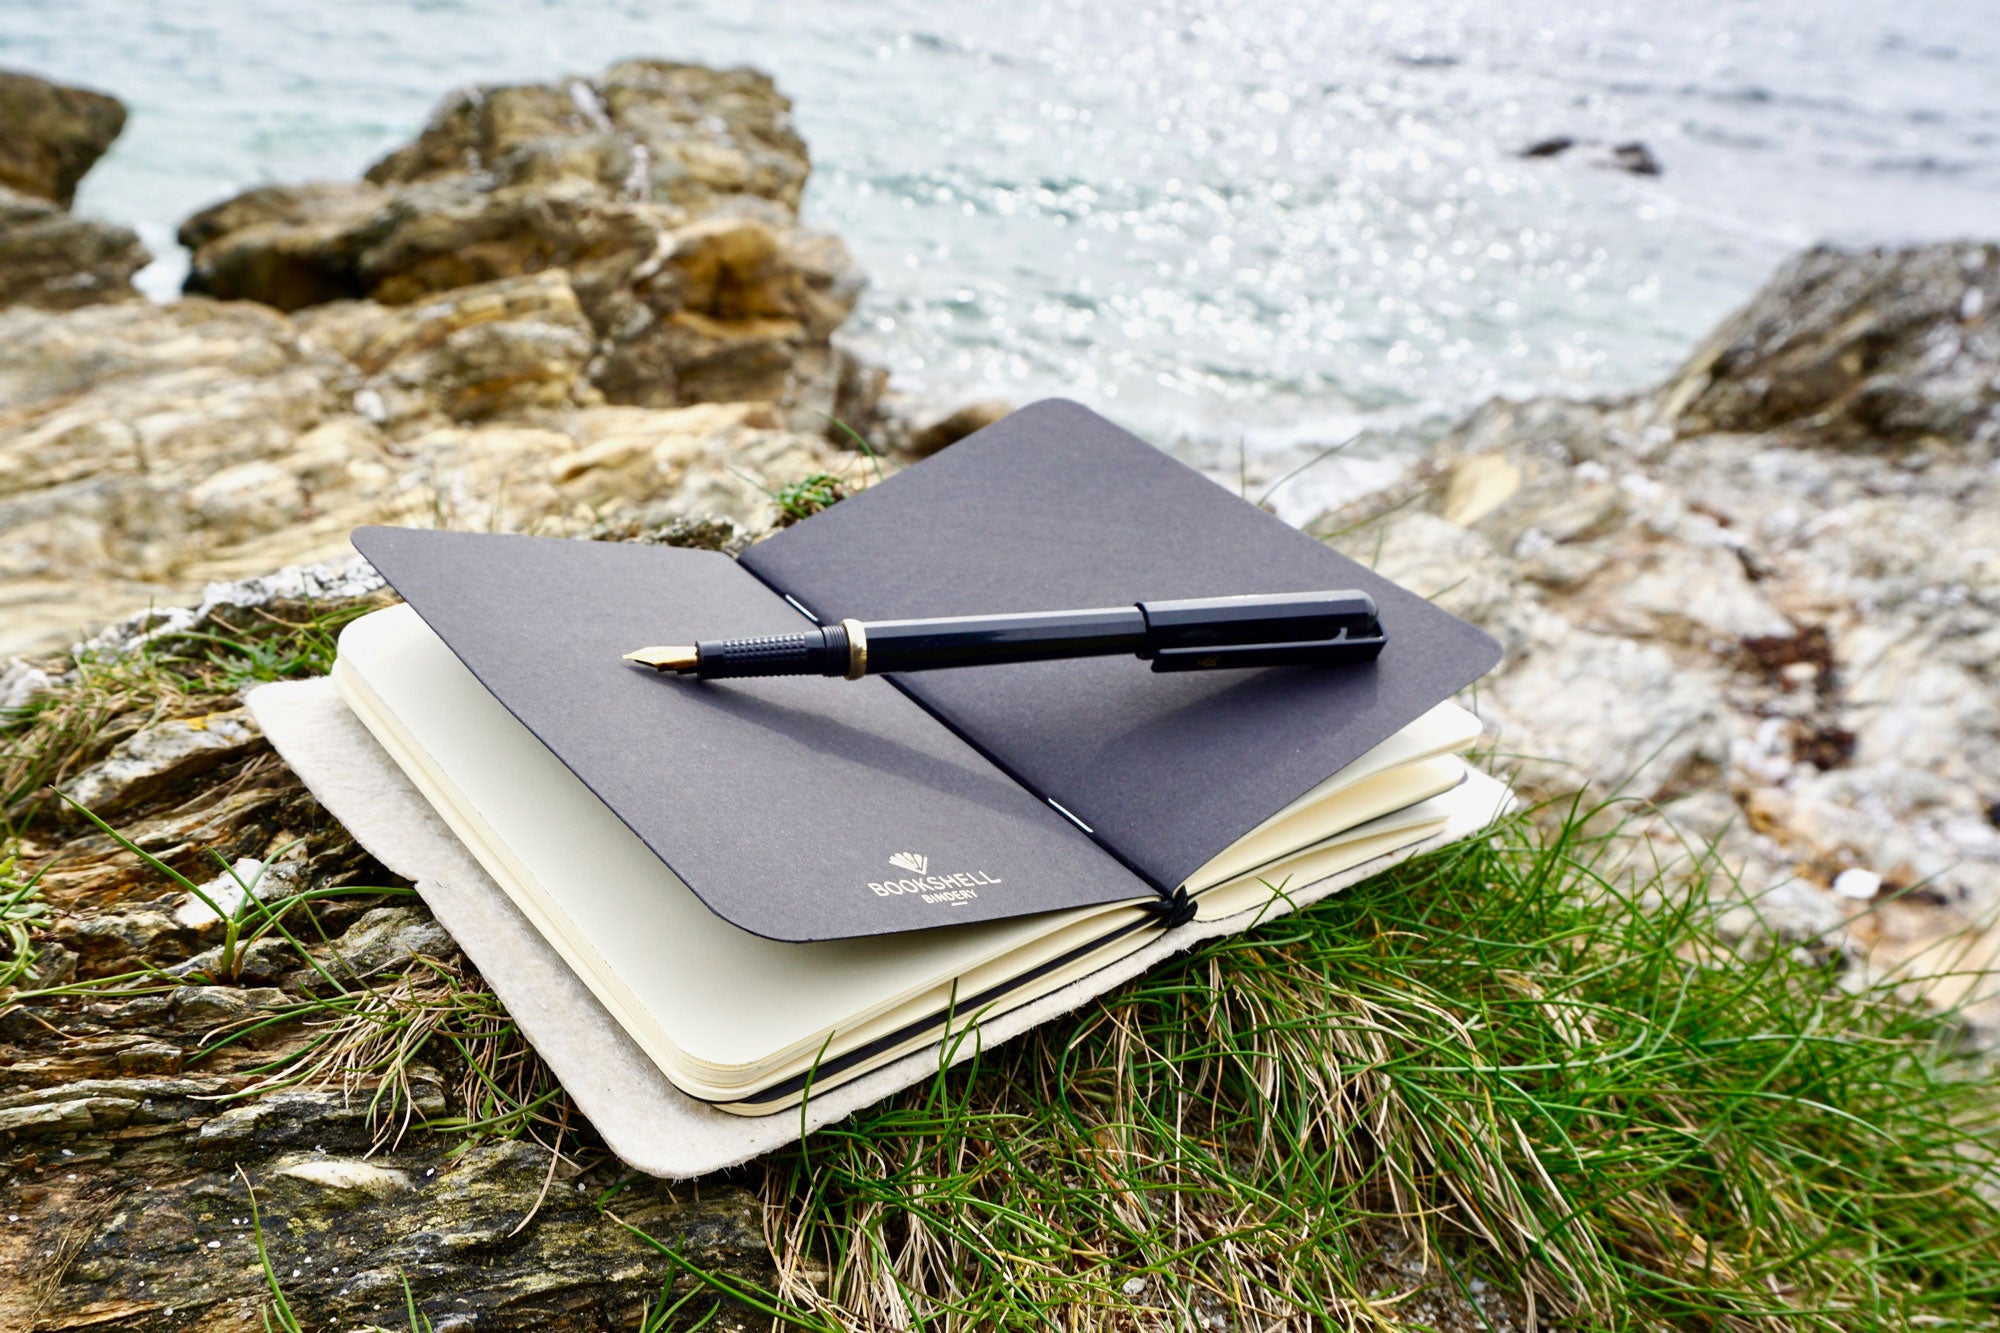 Gold Smooth Vegan Leather Journal made from Pinatex Pineapple leather from Bookshell Bindery shown here in the beach